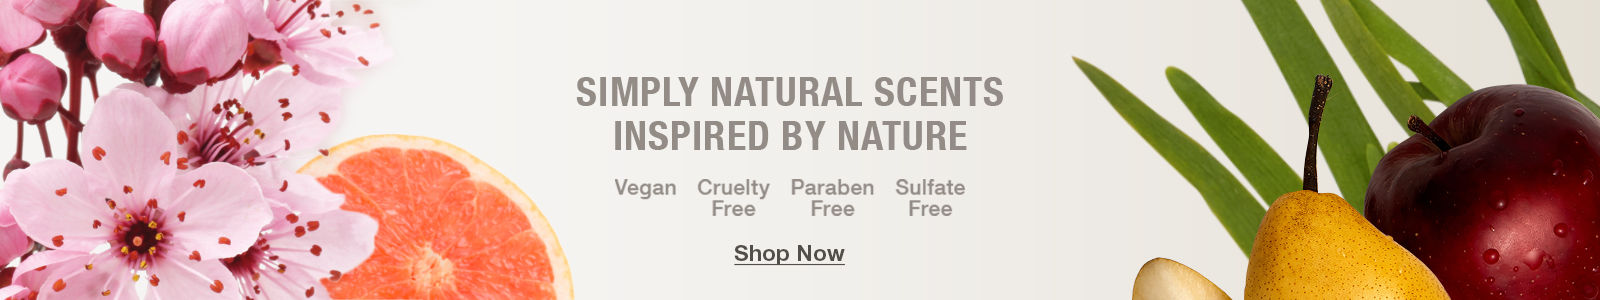 Simply Natural Scents Inspired By Nature, Vegan, Cruelty Free, Paraben Free, Sulfate Free, Shop Now